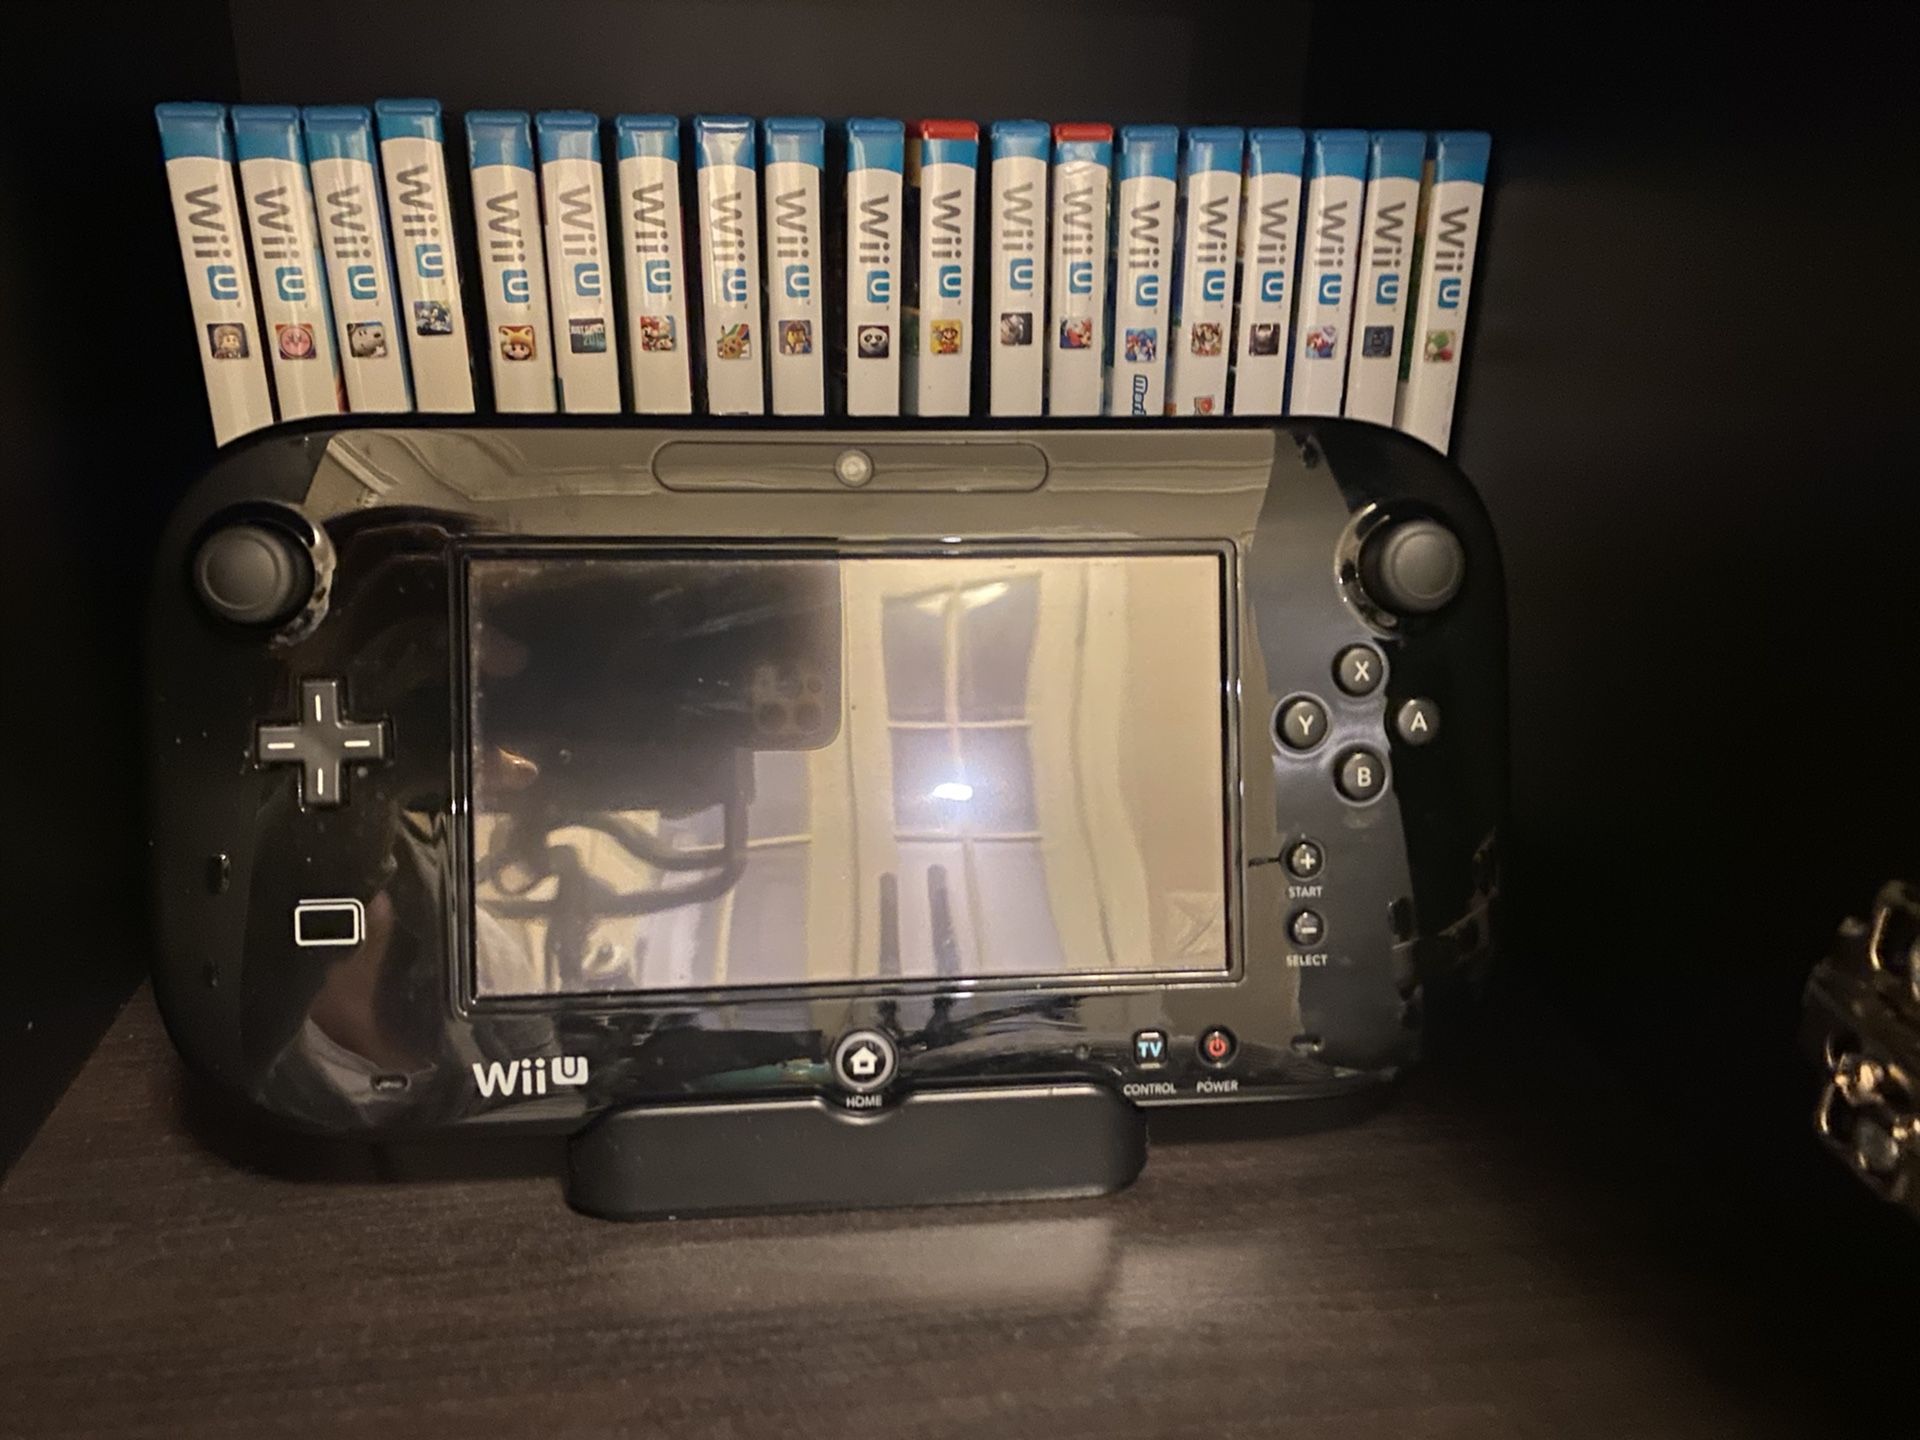 Nintendo Wii U with games and accessories